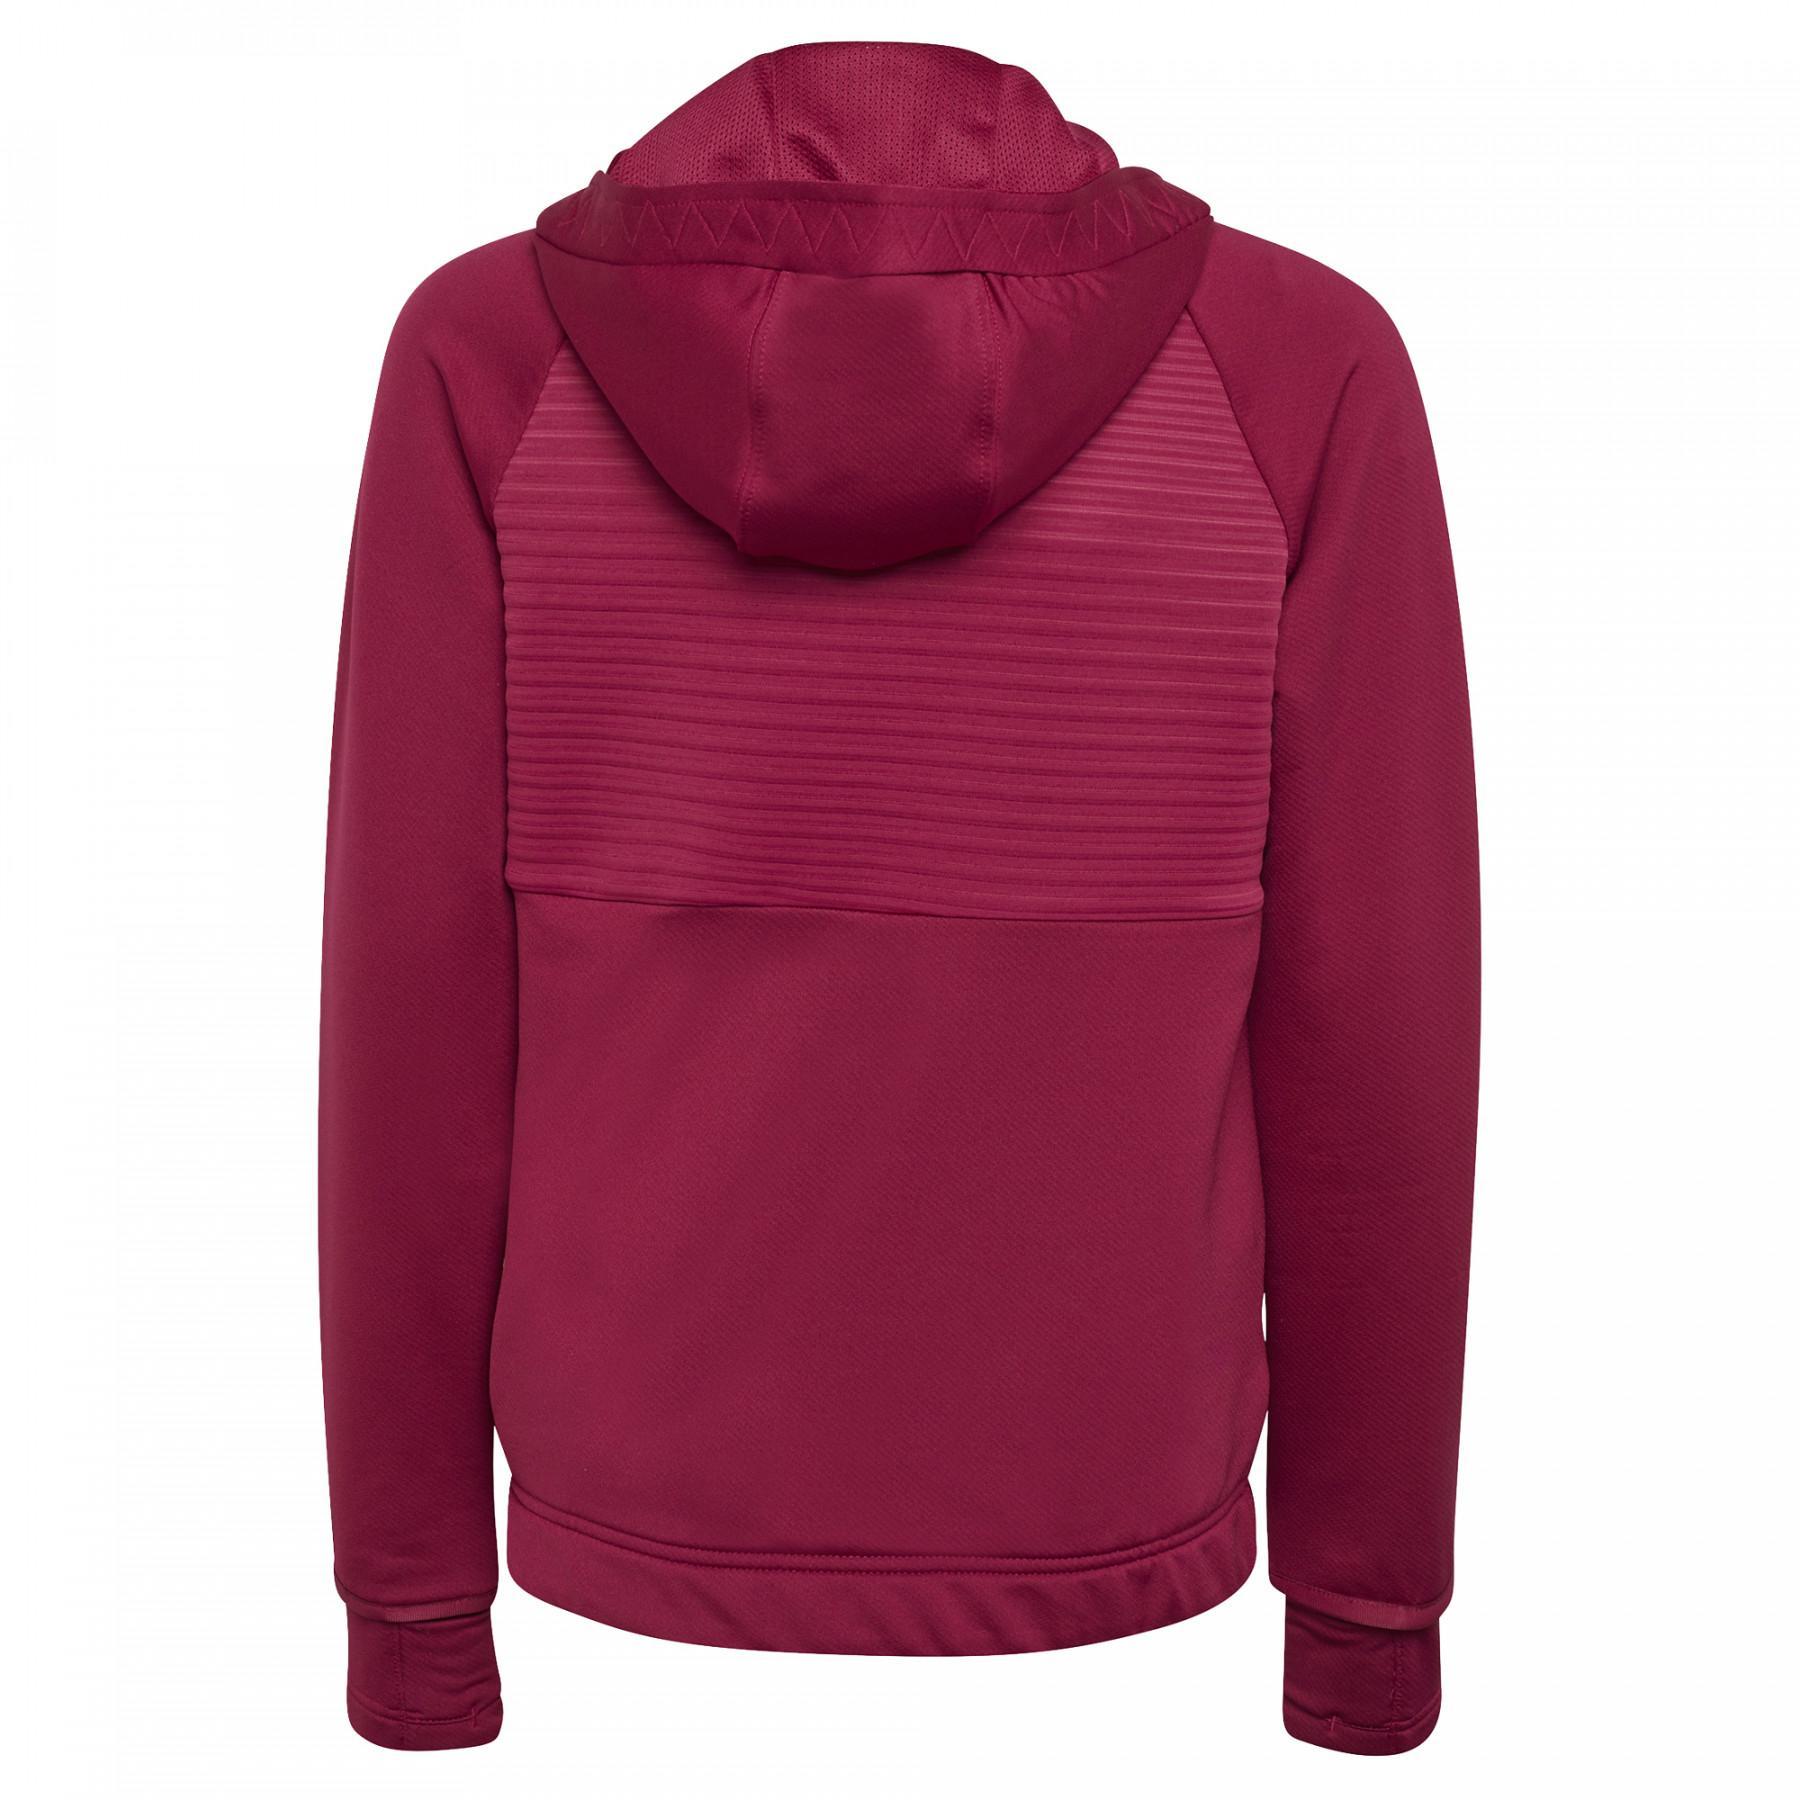 Child hoodie adidas COLD.RDY Full-Zip